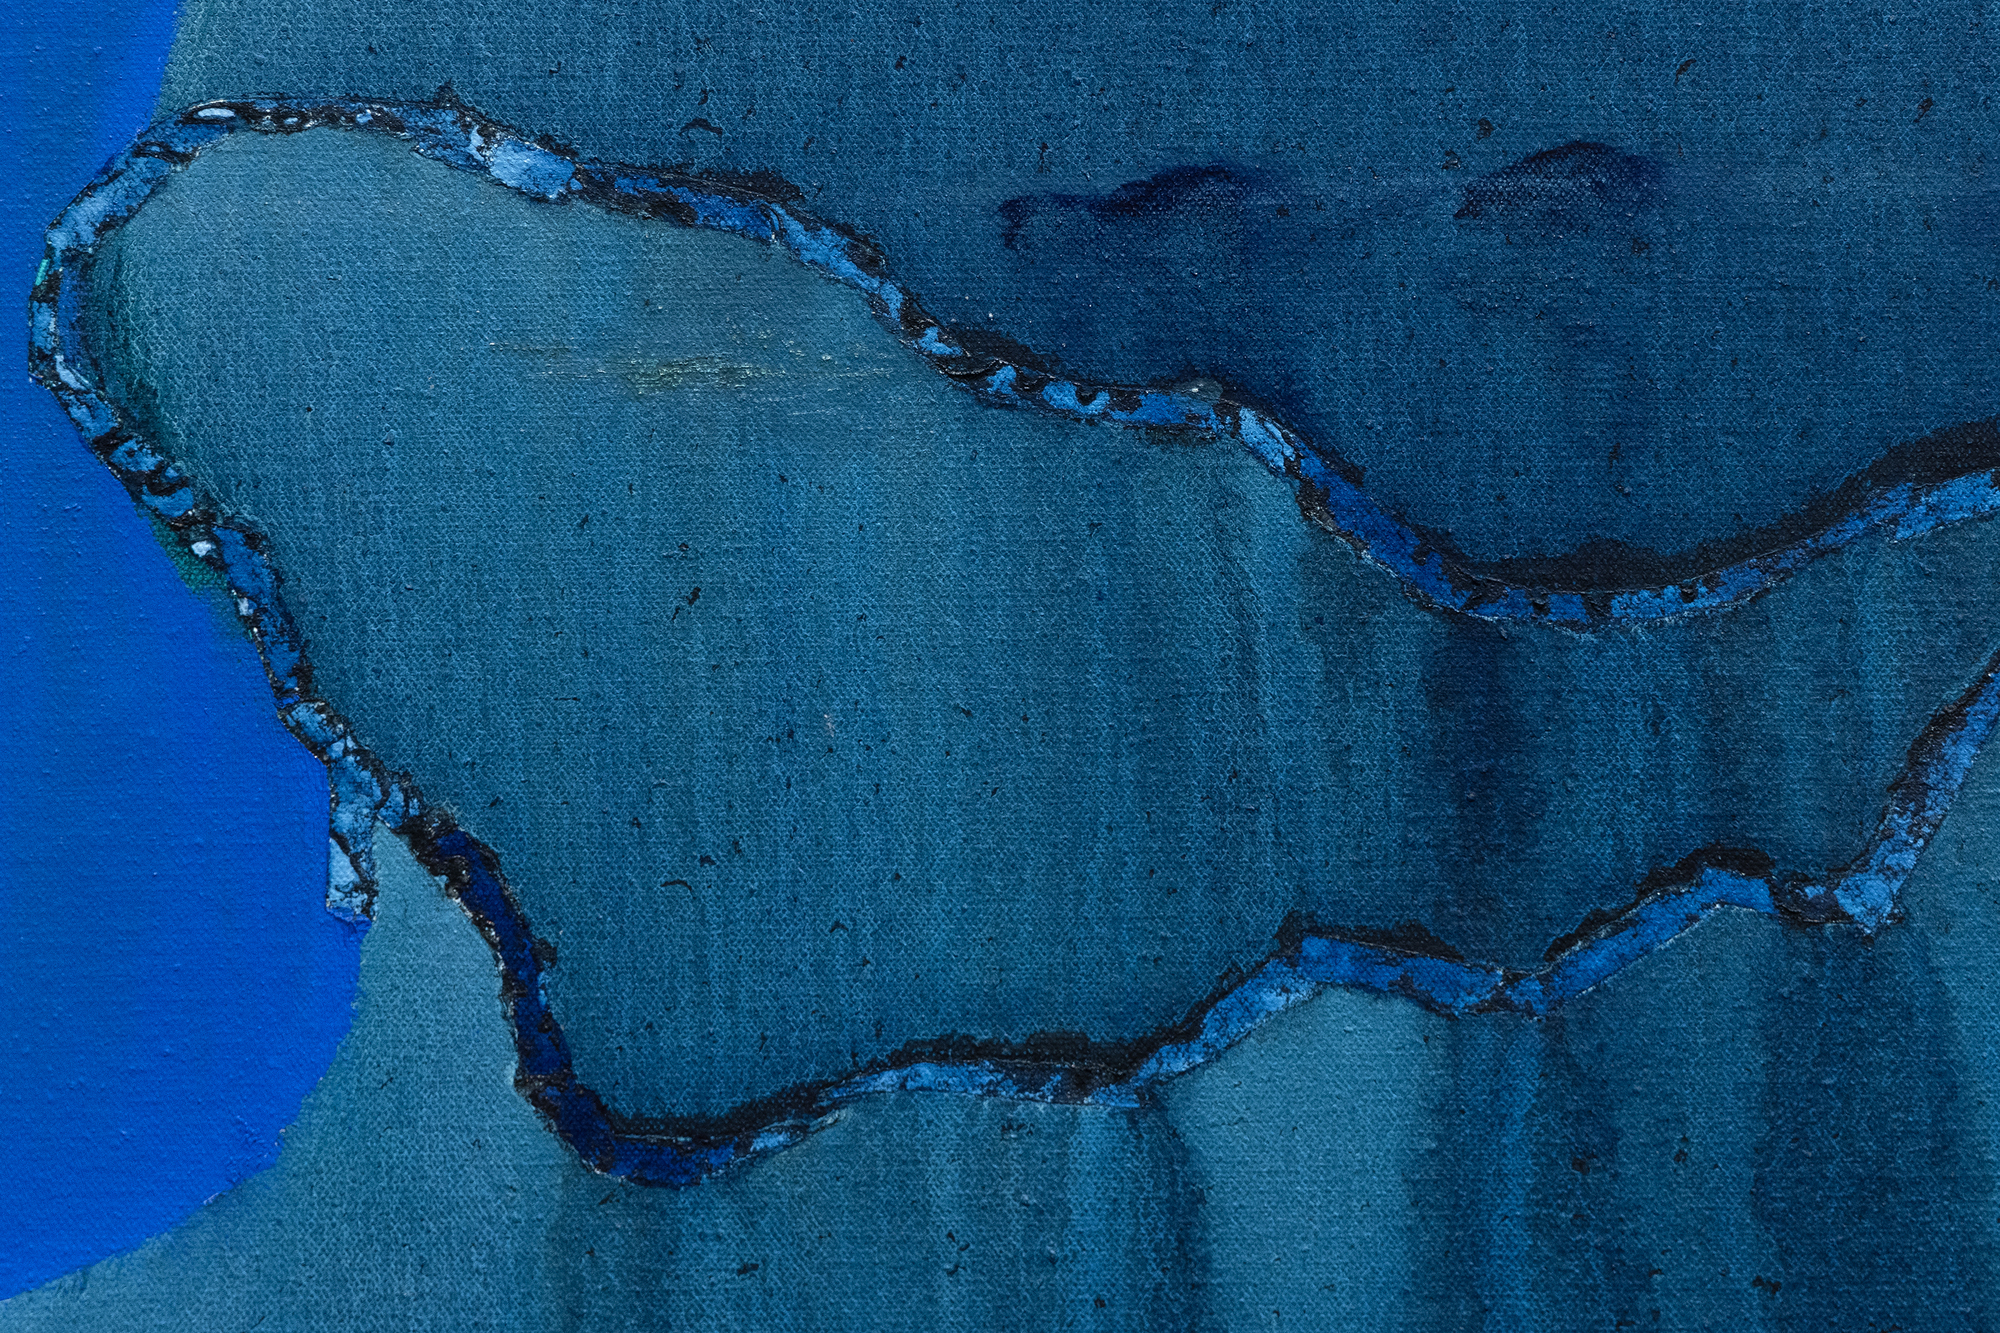 Early in her maturation, Hood established herself as an artist of metaphysically charged images who engaged with various cosmologies upon her return to Houston in 1962. Blue Waters is among those works reflecting her persistent search for spiritual sustenance. A band of saturated, opaque blue reaches forward into a sphere of limpid blue azure, reminiscent of an earthly, watery globe. This bold yet harmonious intrusion resembles an ethereal arm transforming a fluid state into a mesmerizing phosphorescent phthalo green, its opulence and streaming brilliance suggesting divine intervention evoking the metaphor of 'the hand of God', animating the essence of life. Hood's masterful use of color and form often invites interpretations of a cosmic or spiritual embrace within the natural world. Yet her limpid washes of poured color demonstrate not randomness or uncertainty but her remarkable mastery and control that adds another element of awe to Blue Waters.